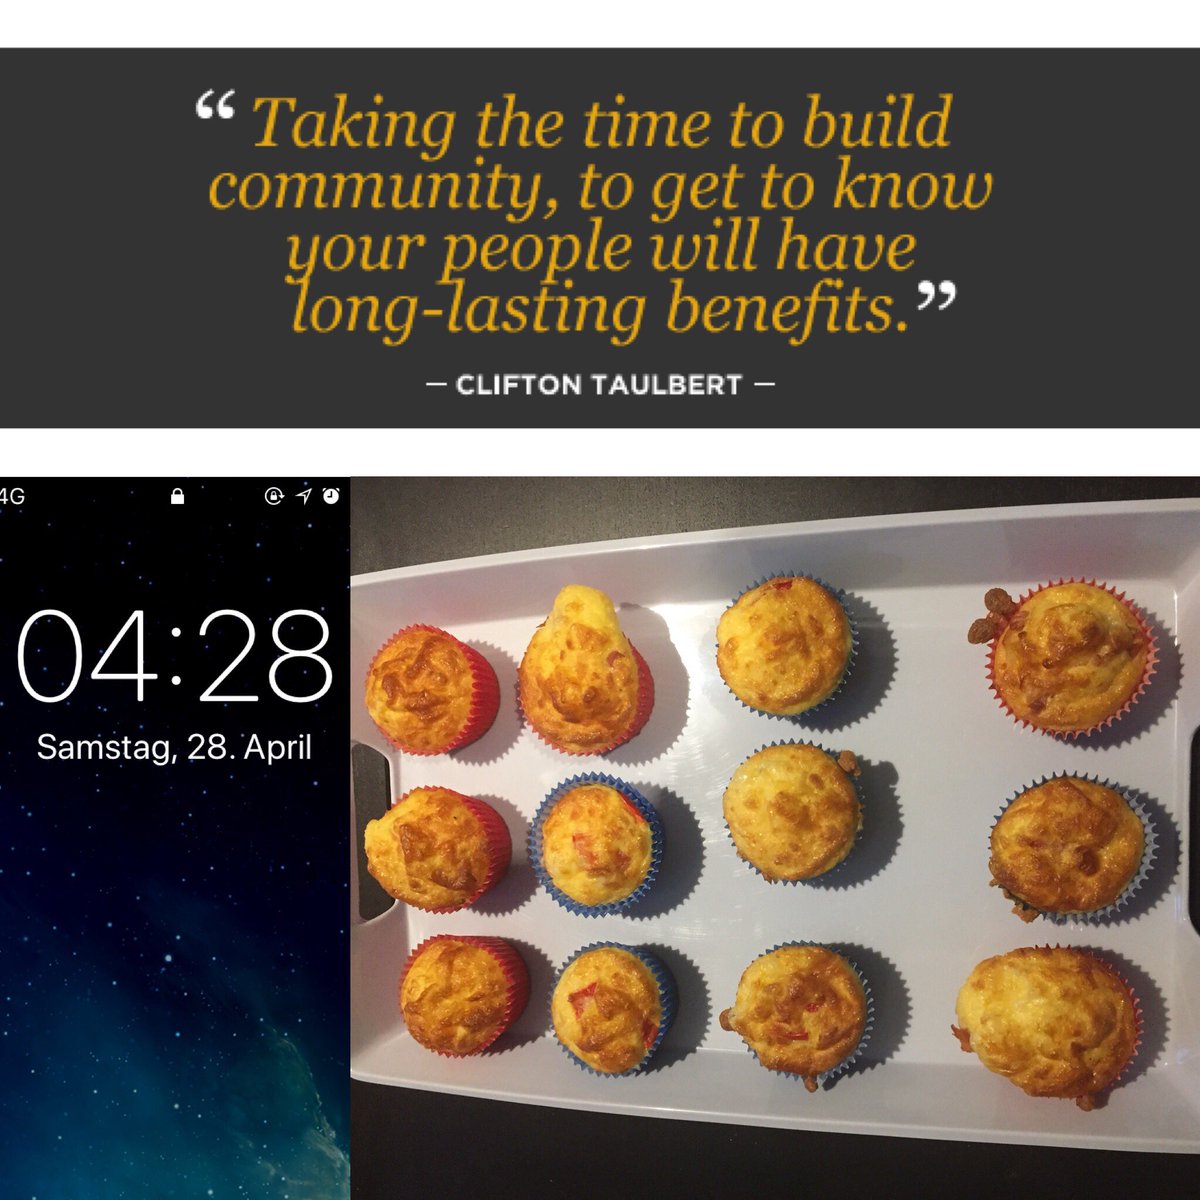 Getting ready for start of term 2 at Geckos and a Meet & Greet for the families with delicious LCHF muffins. Thanks to @ditchthecarbs for the recipe. #0445club #getafterit #disciplineequalsfreedom #geckosgermanthatsticks #lifeofaprincipal